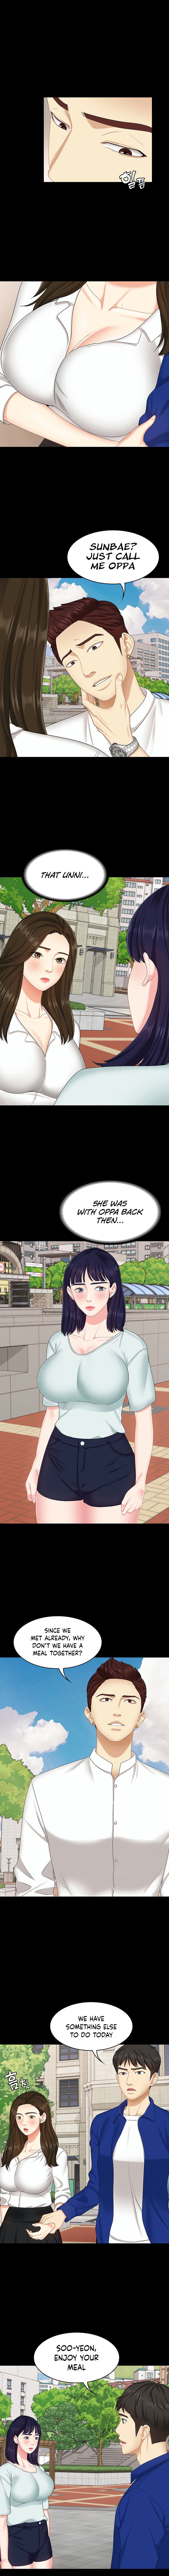 She's my Younger Sister, but it's okay - Chapter 9 Page 3